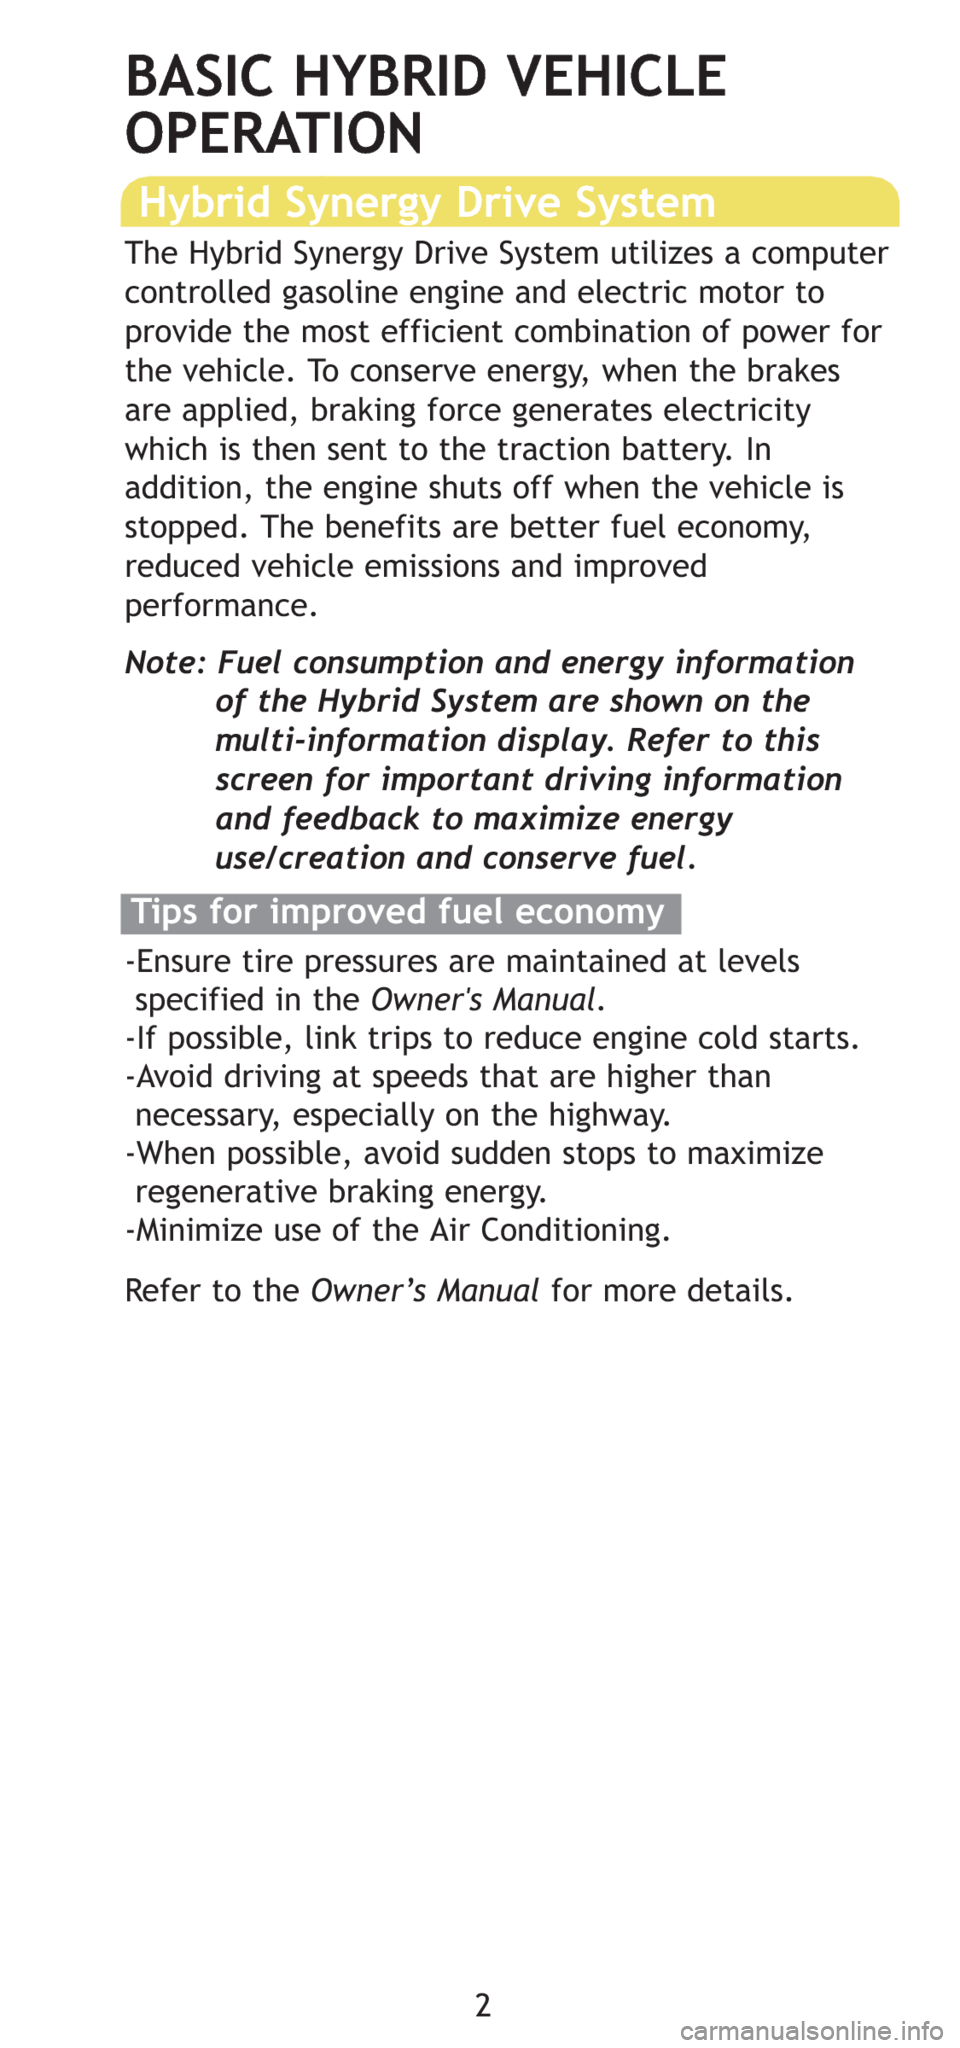 TOYOTA PRIUS 2008 2.G Quick Reference Guide 2
BASIC HYBRID VEHICLE
OPERATION
Hybrid Synergy Drive System
The Hybrid Synergy Drive System utilizes a computer
controlled gasoline engine and electric motor to
provide the most efficient combination